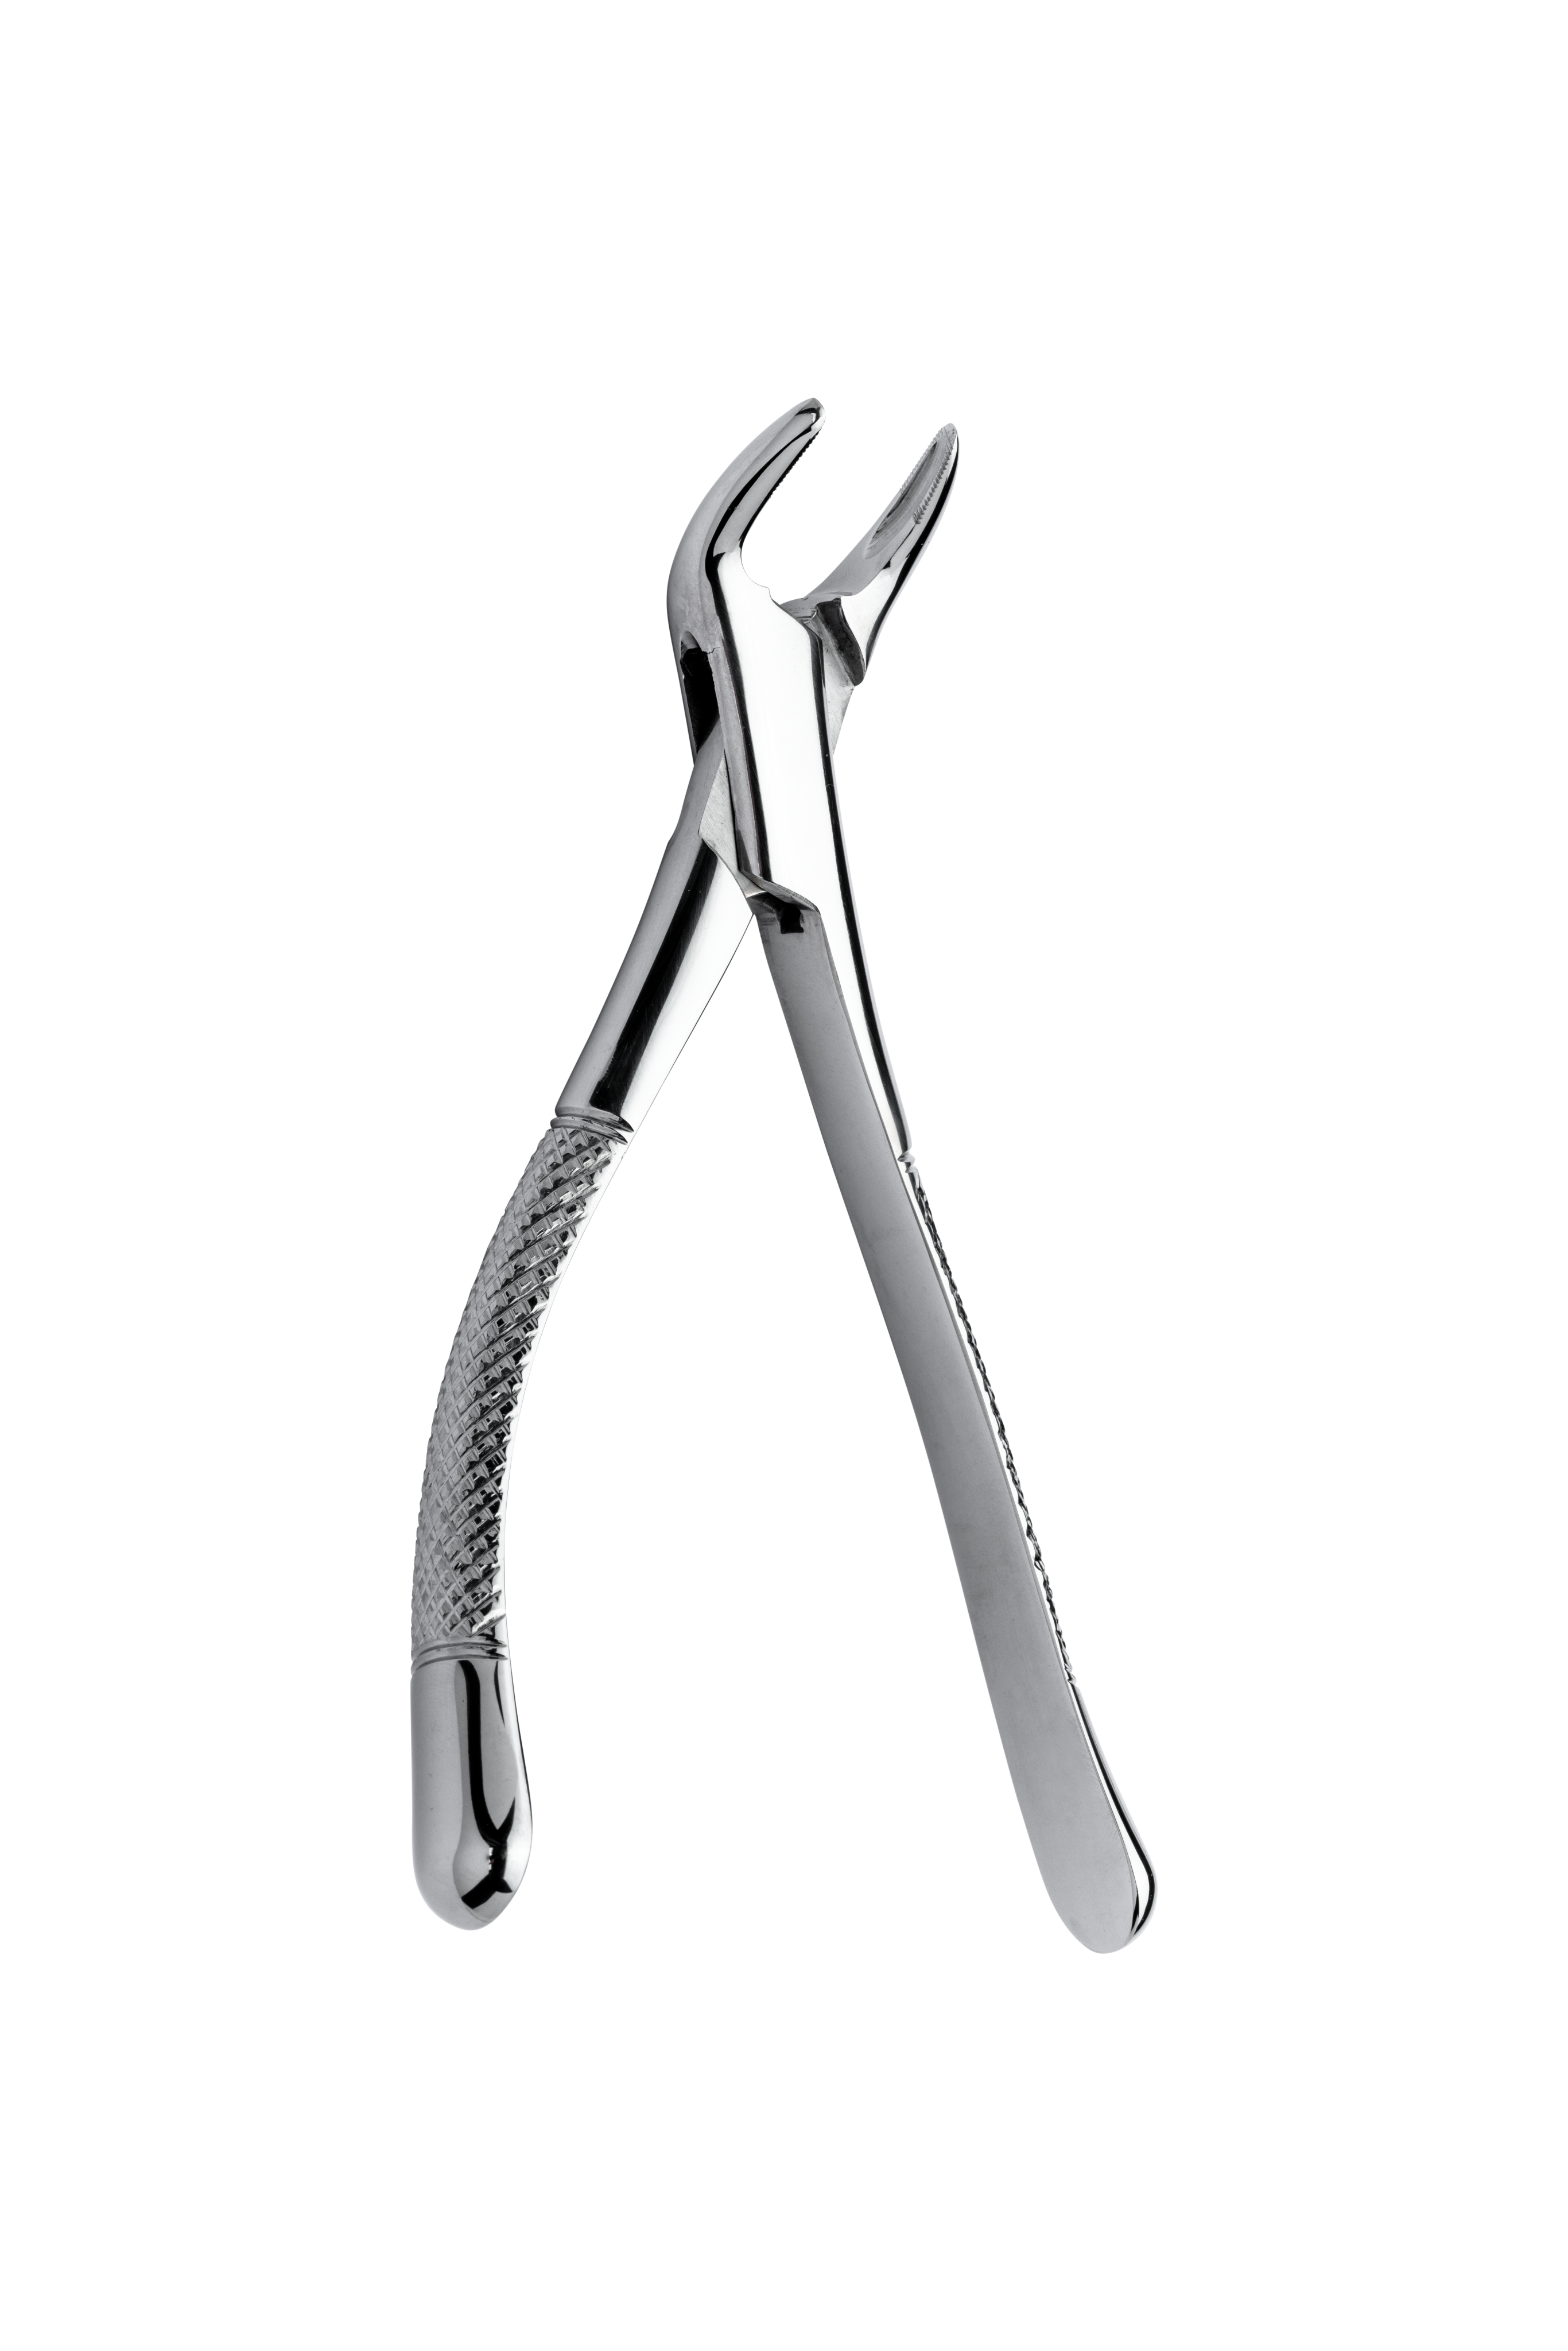 Extracting forceps 151 extra grip